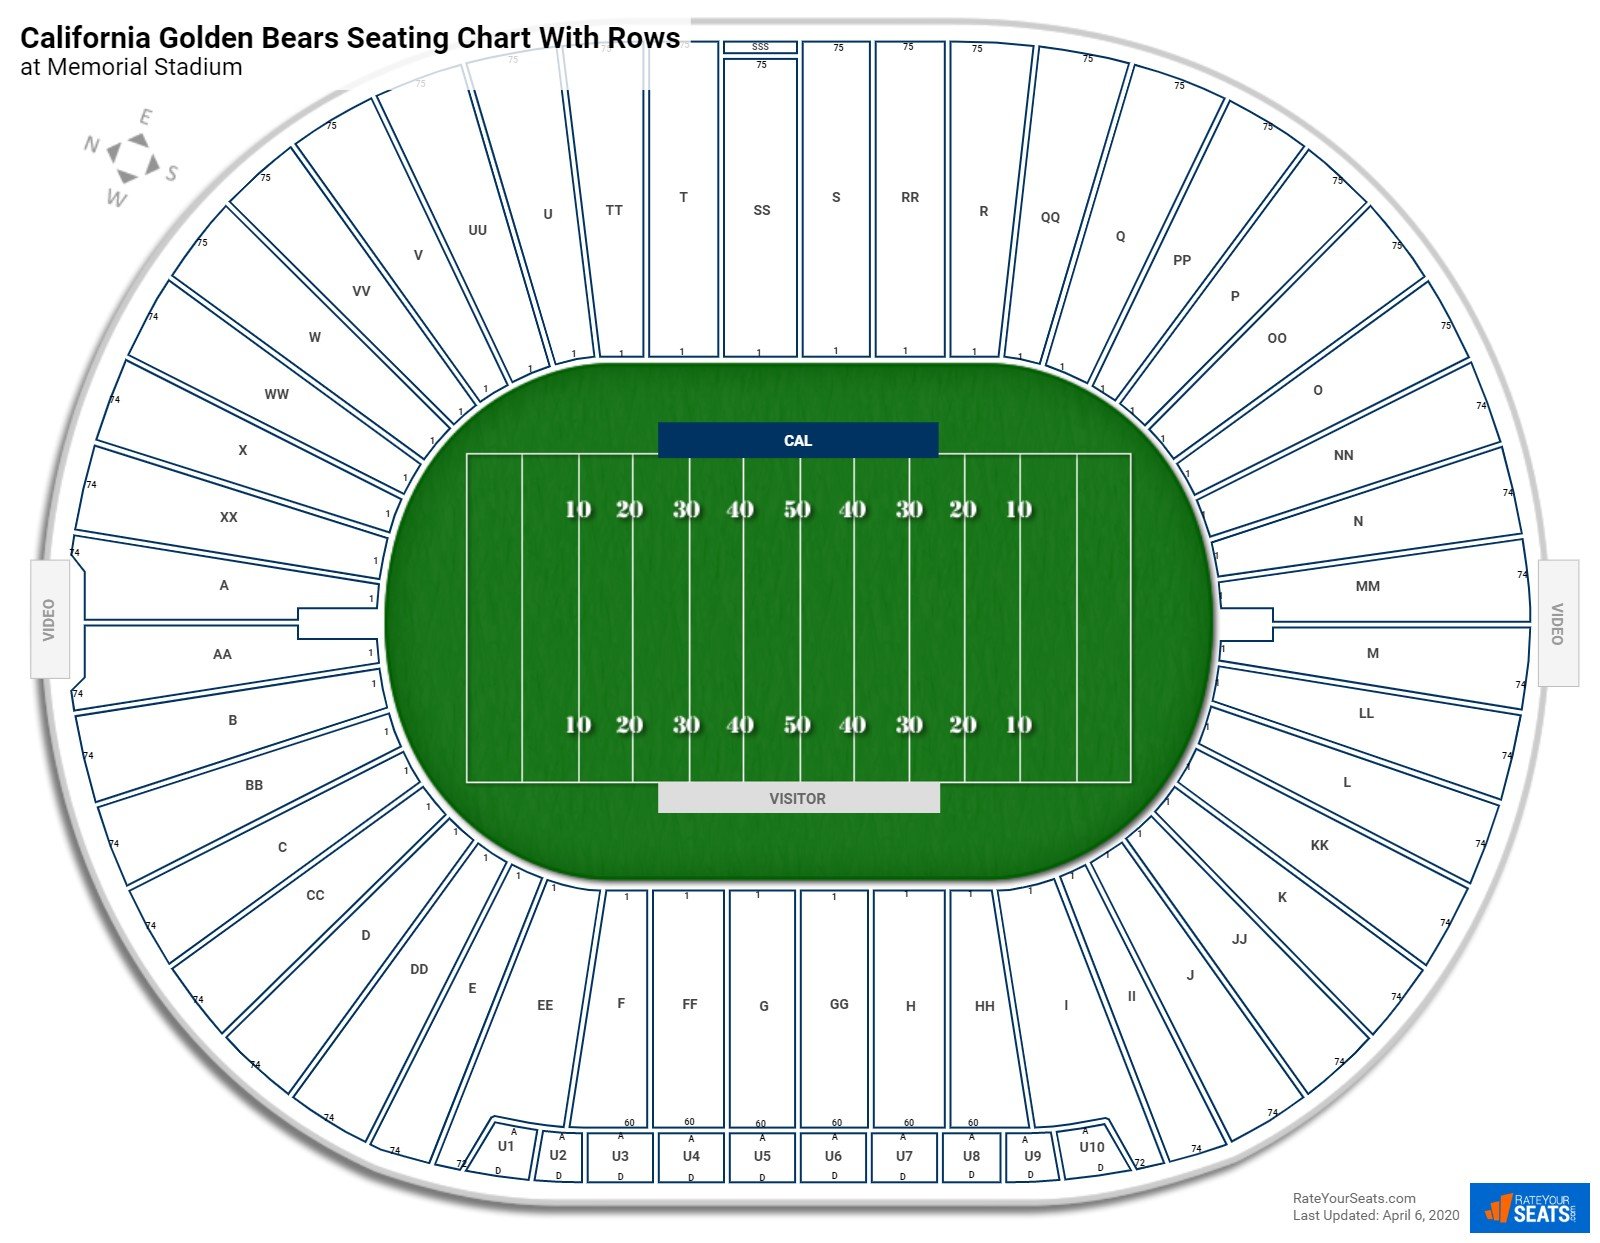 Memorial Stadium (Cal) seating chart with row numbers